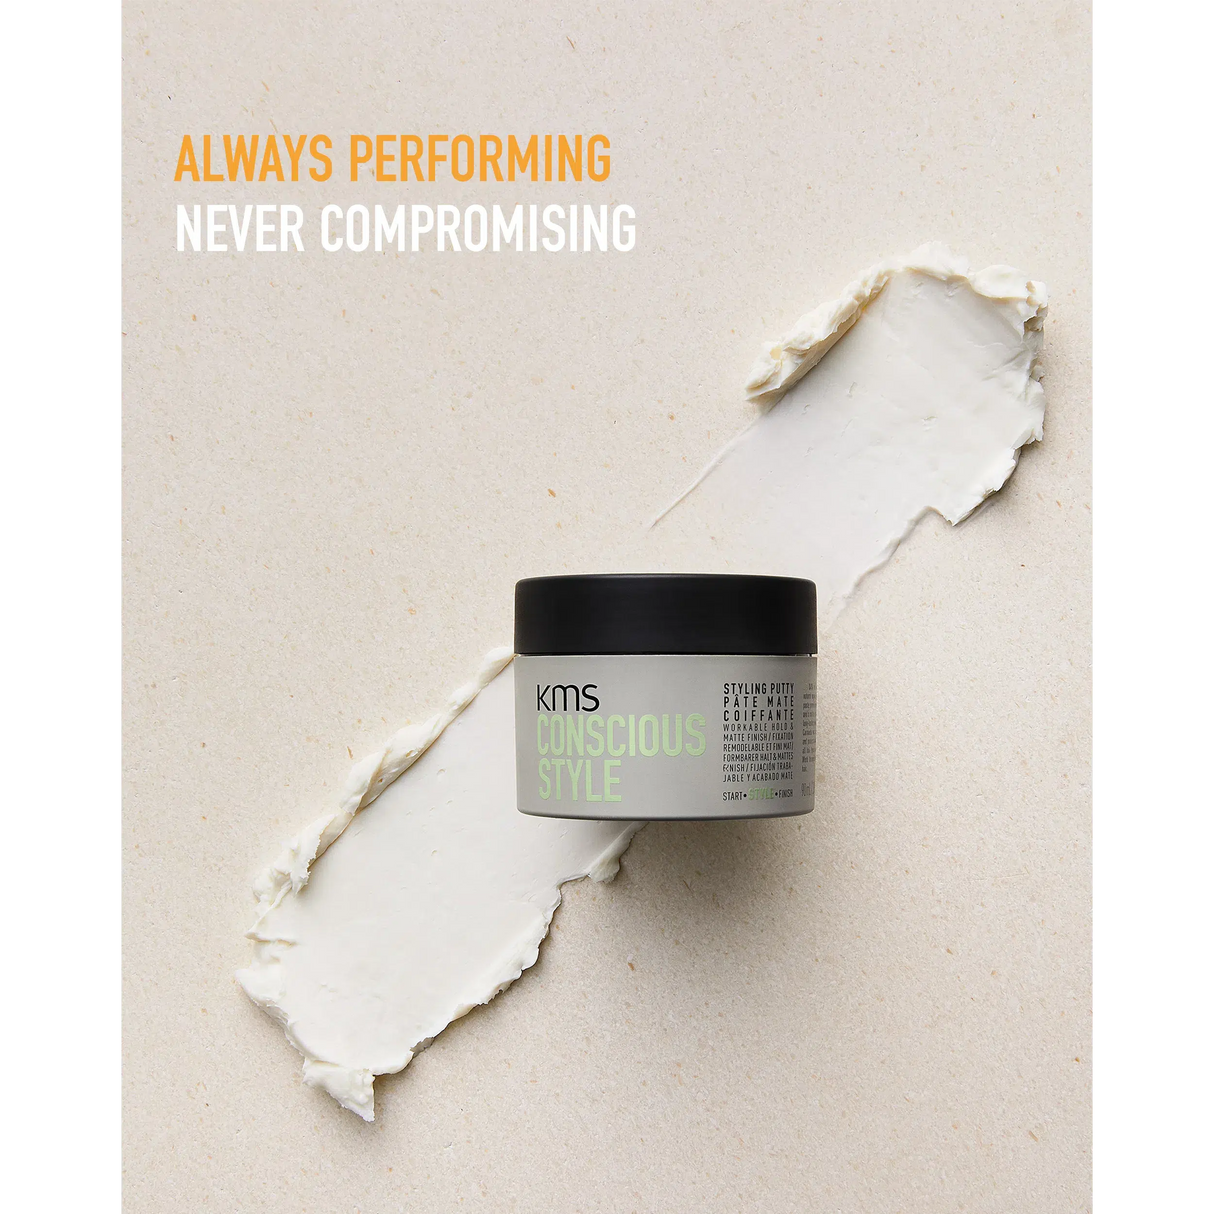 Conscious Style Everyday Styling Putty